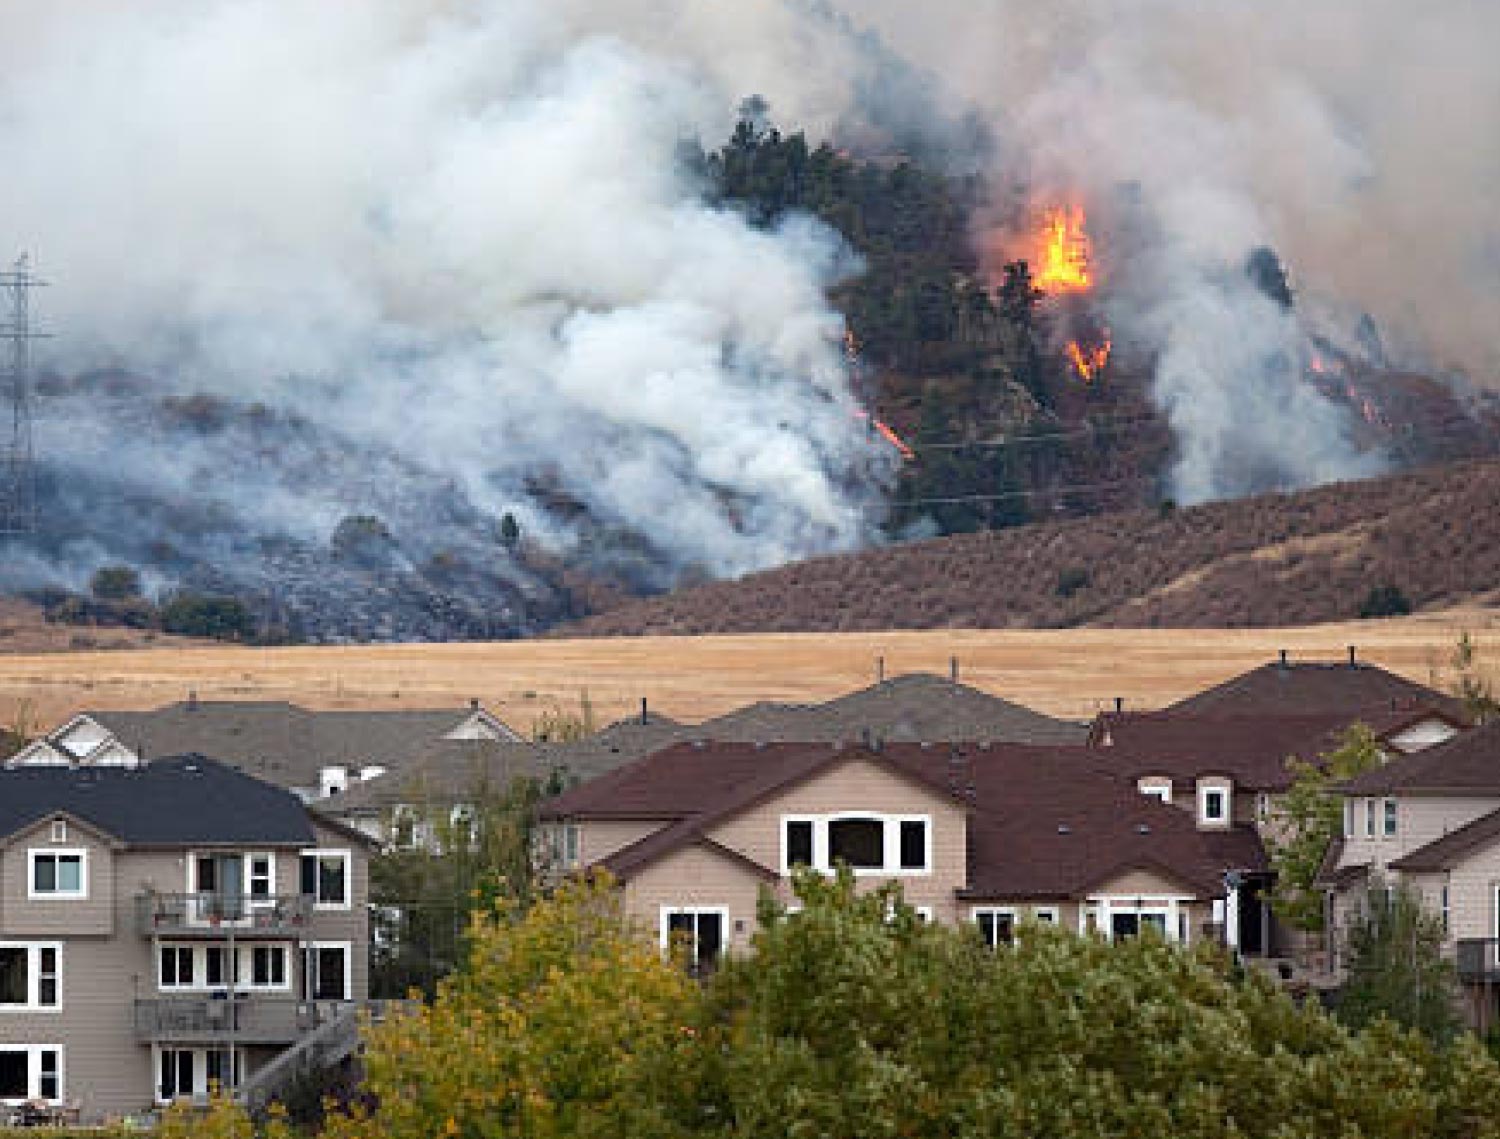 distant view of a fire burning hills behind a neighborhood